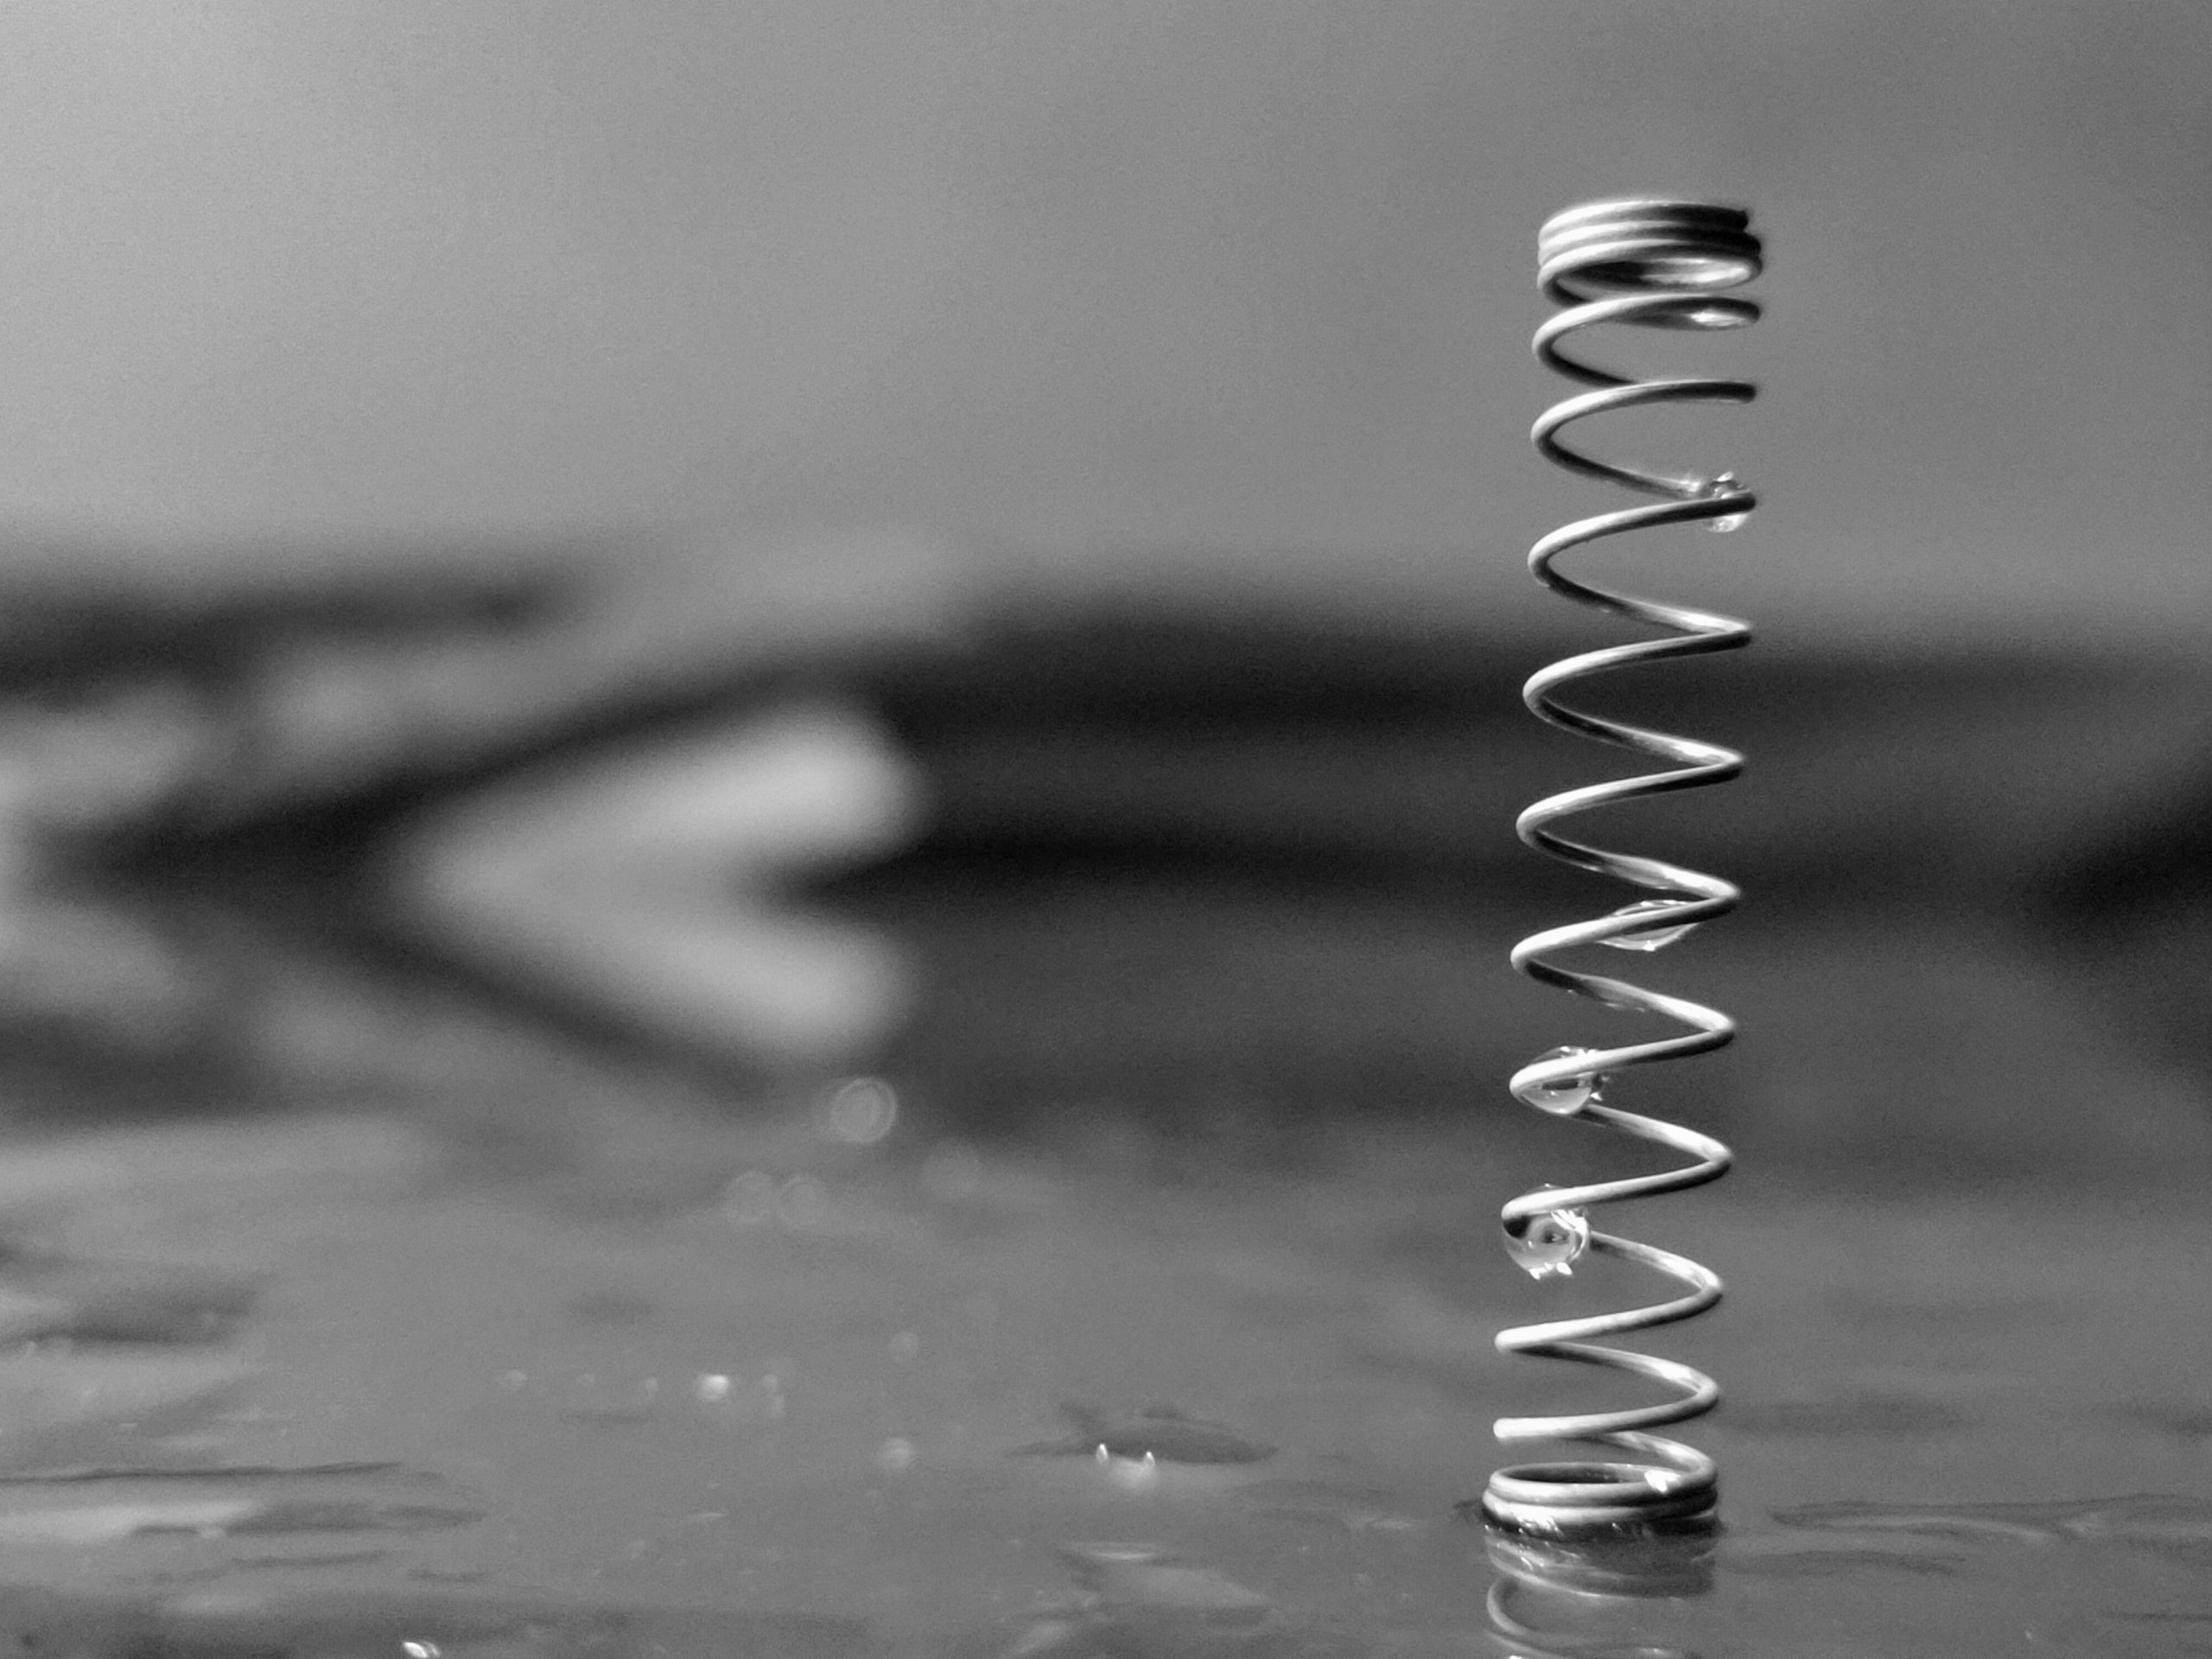 Metal Spring in Black and White